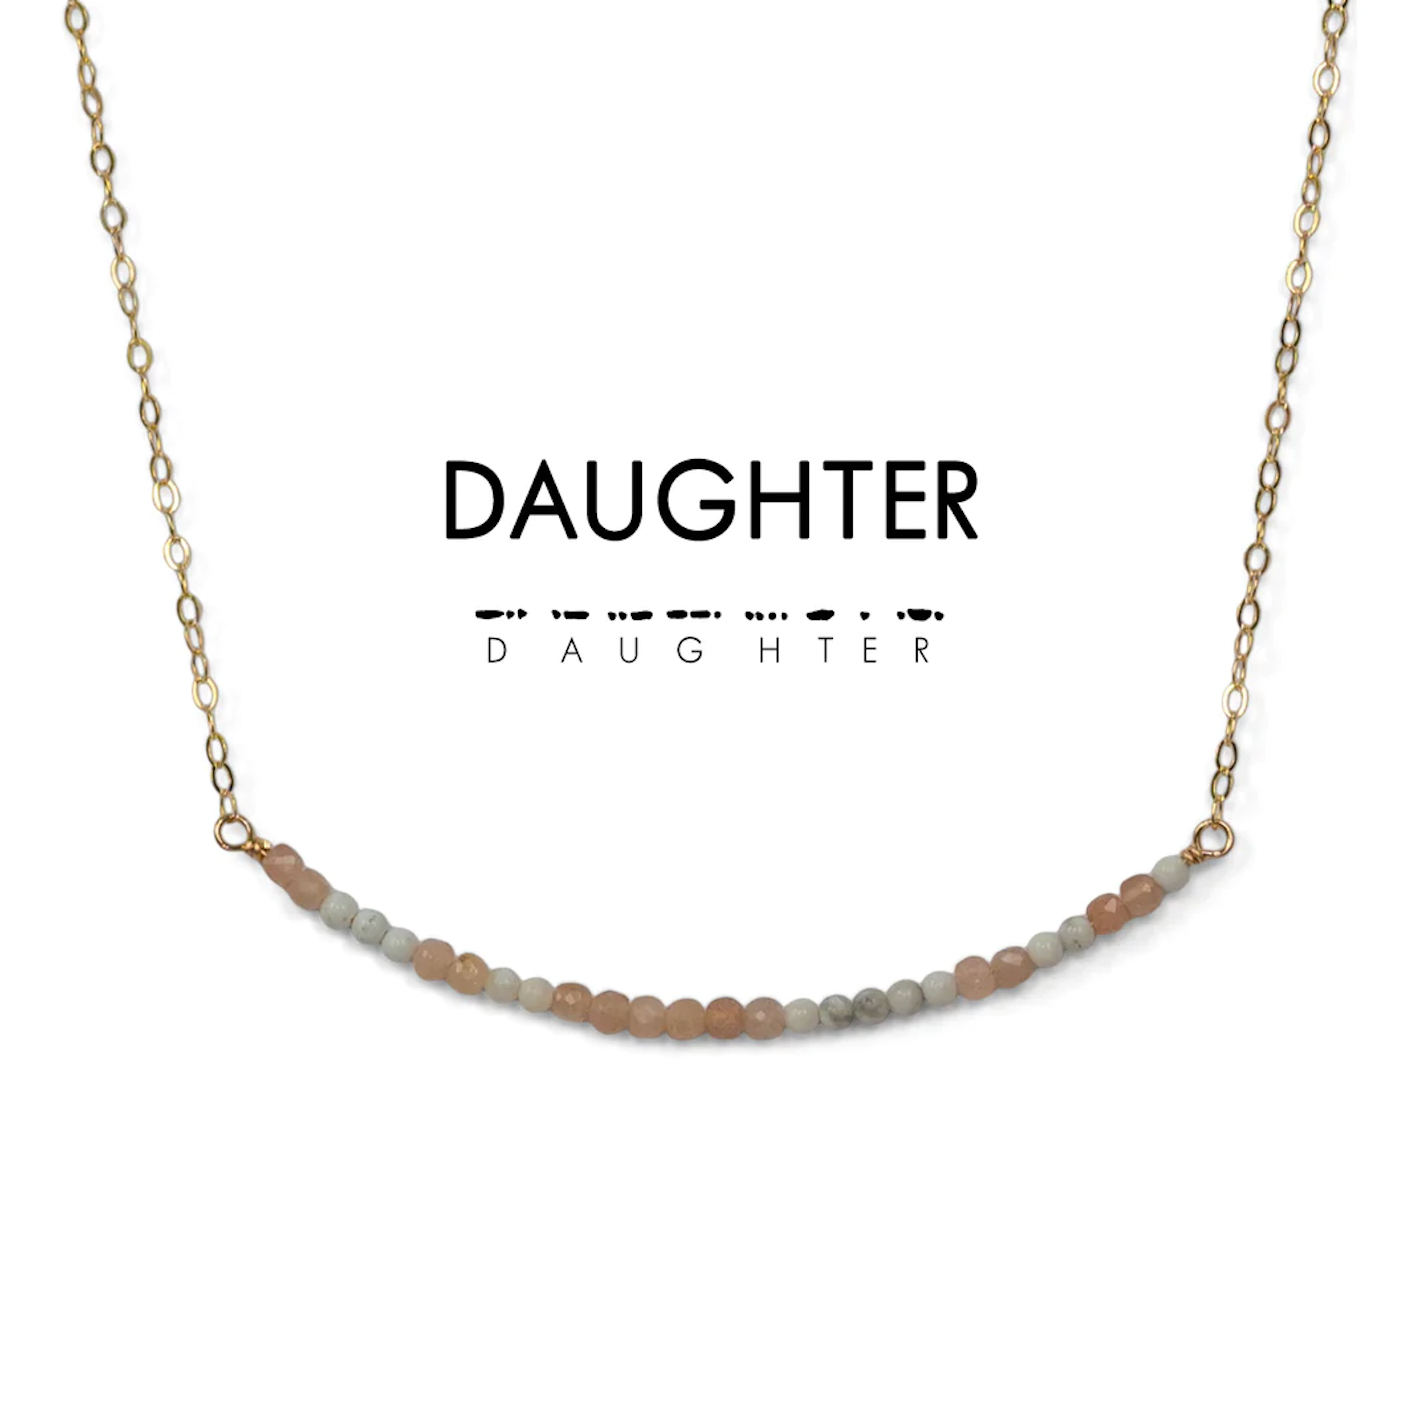 Ethic Goods Morse Code Dainty Stone Necklace - Daughter